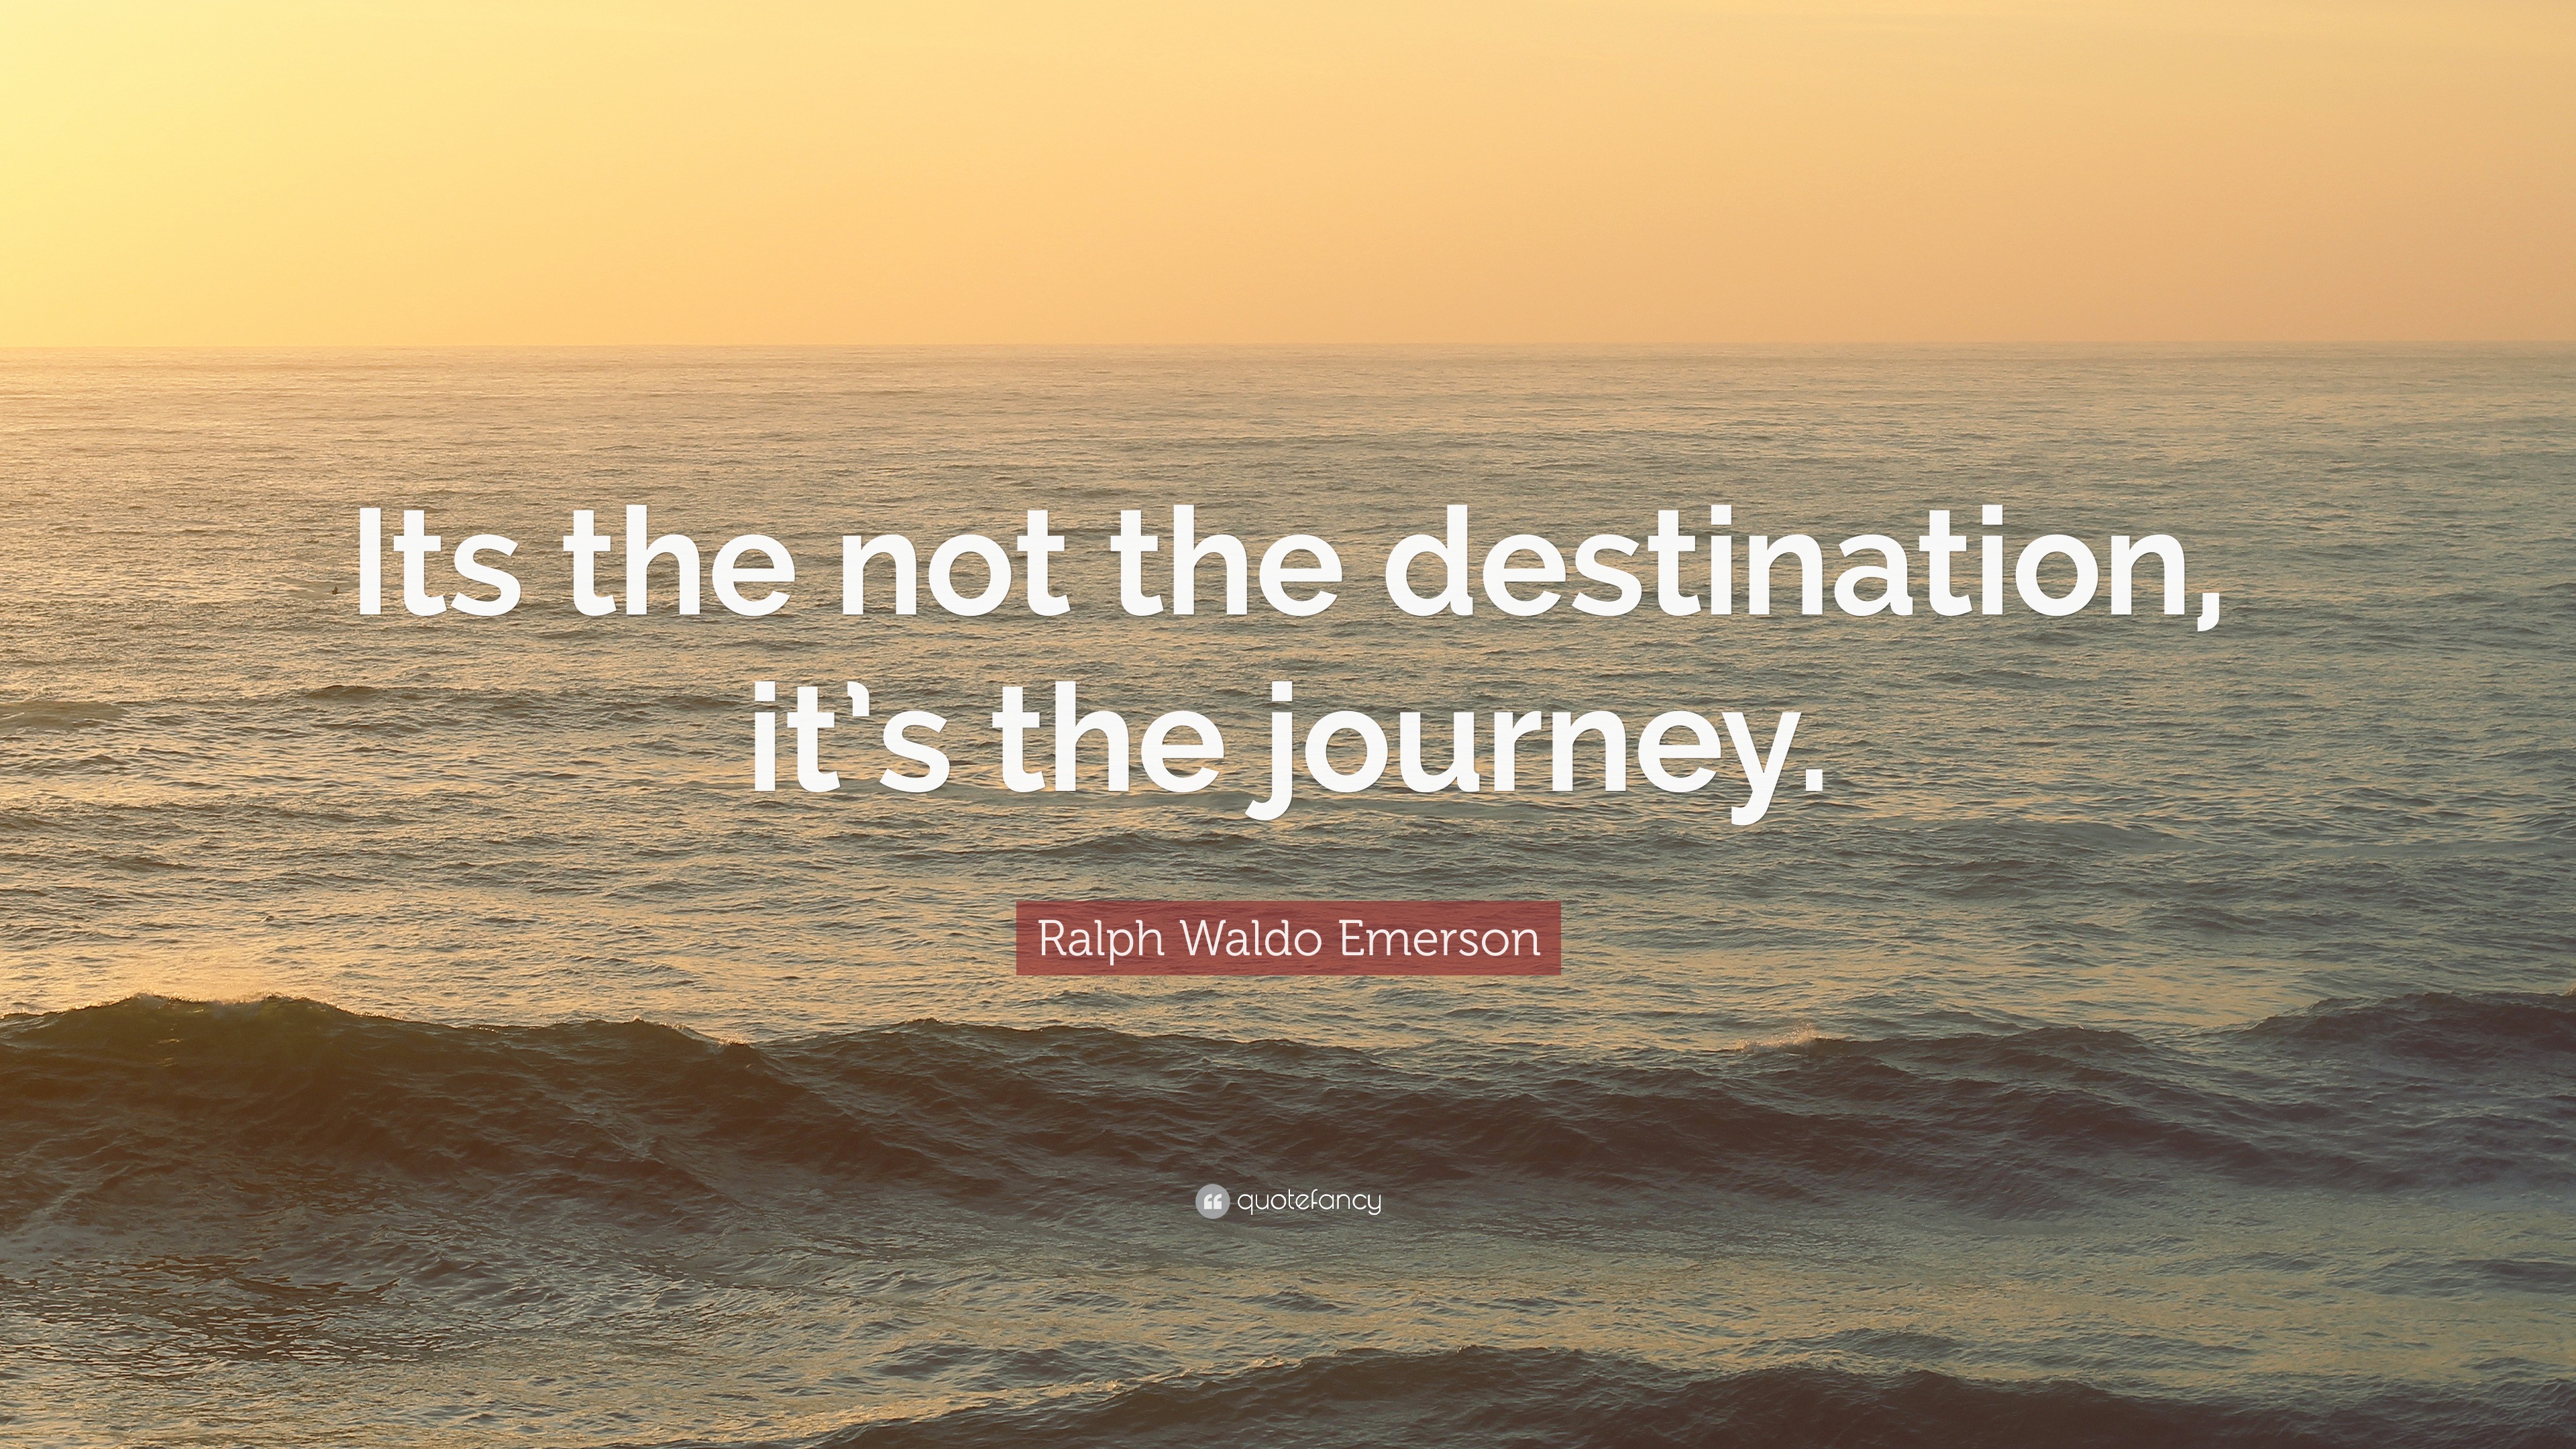 2588624-Ralph-Waldo-Emerson-Quote-Its-the-not-the-destination-it-s-the.jpg